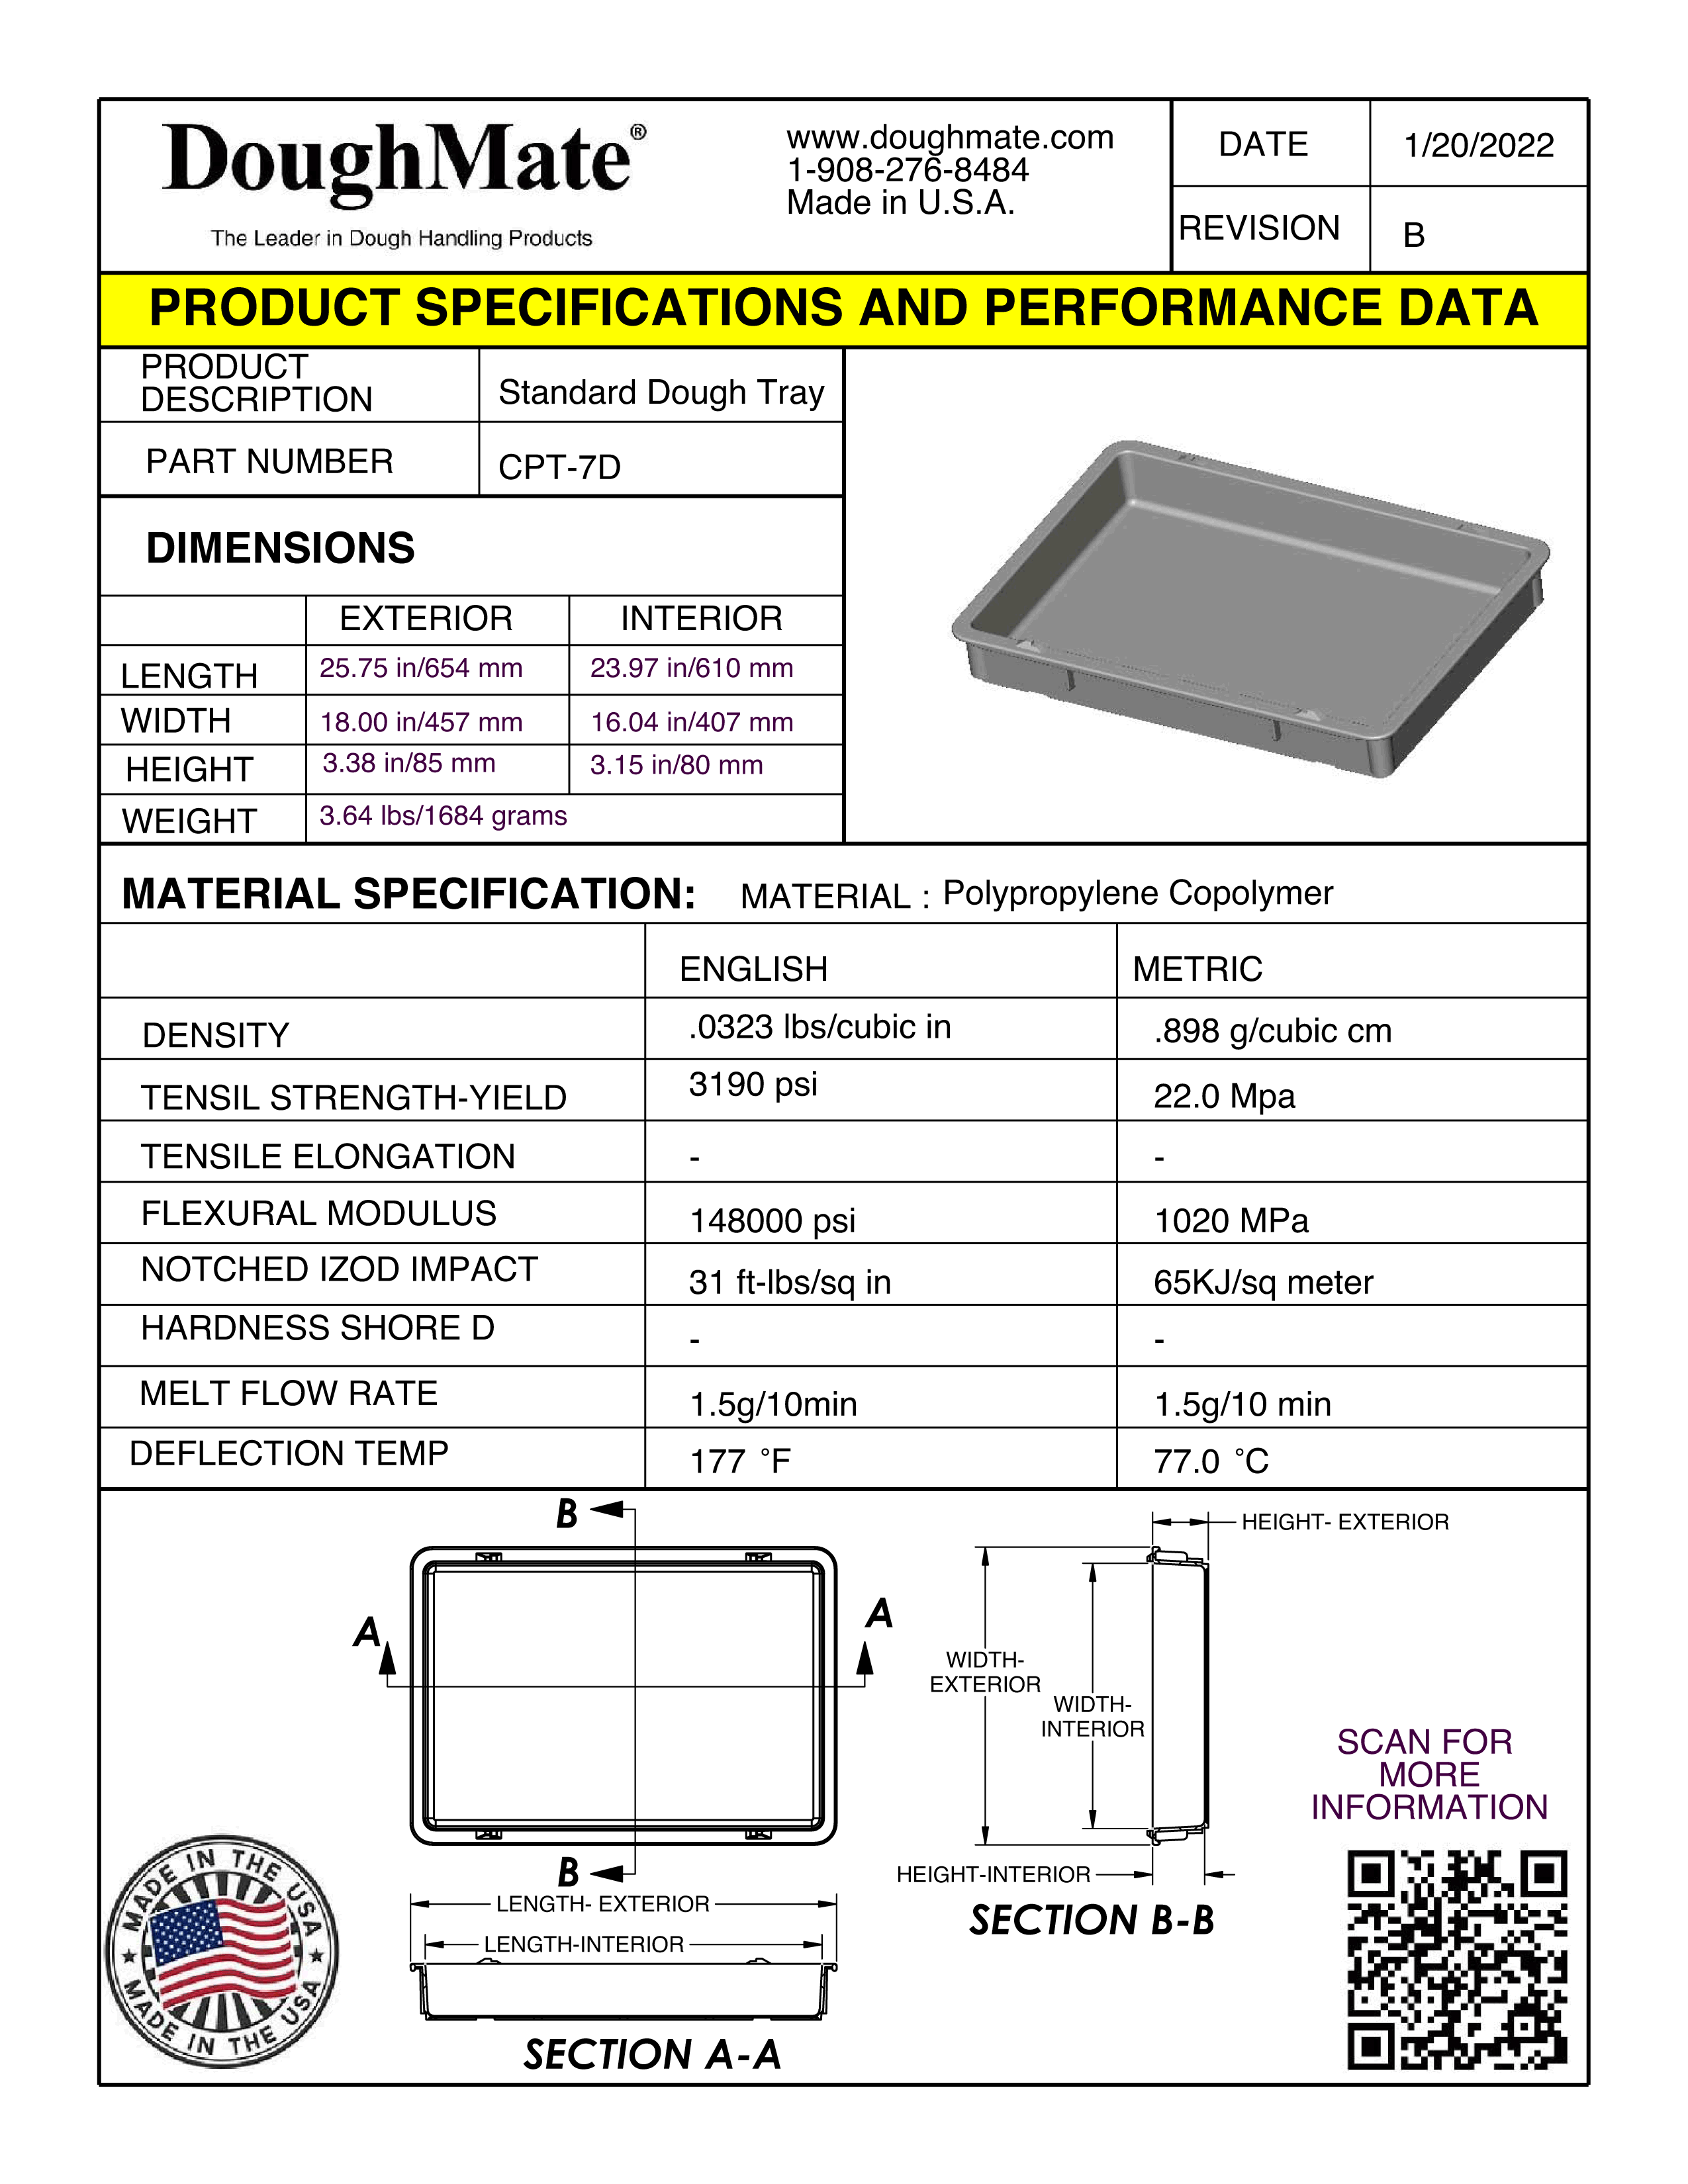 CPT-7D Product Specifications and Performance